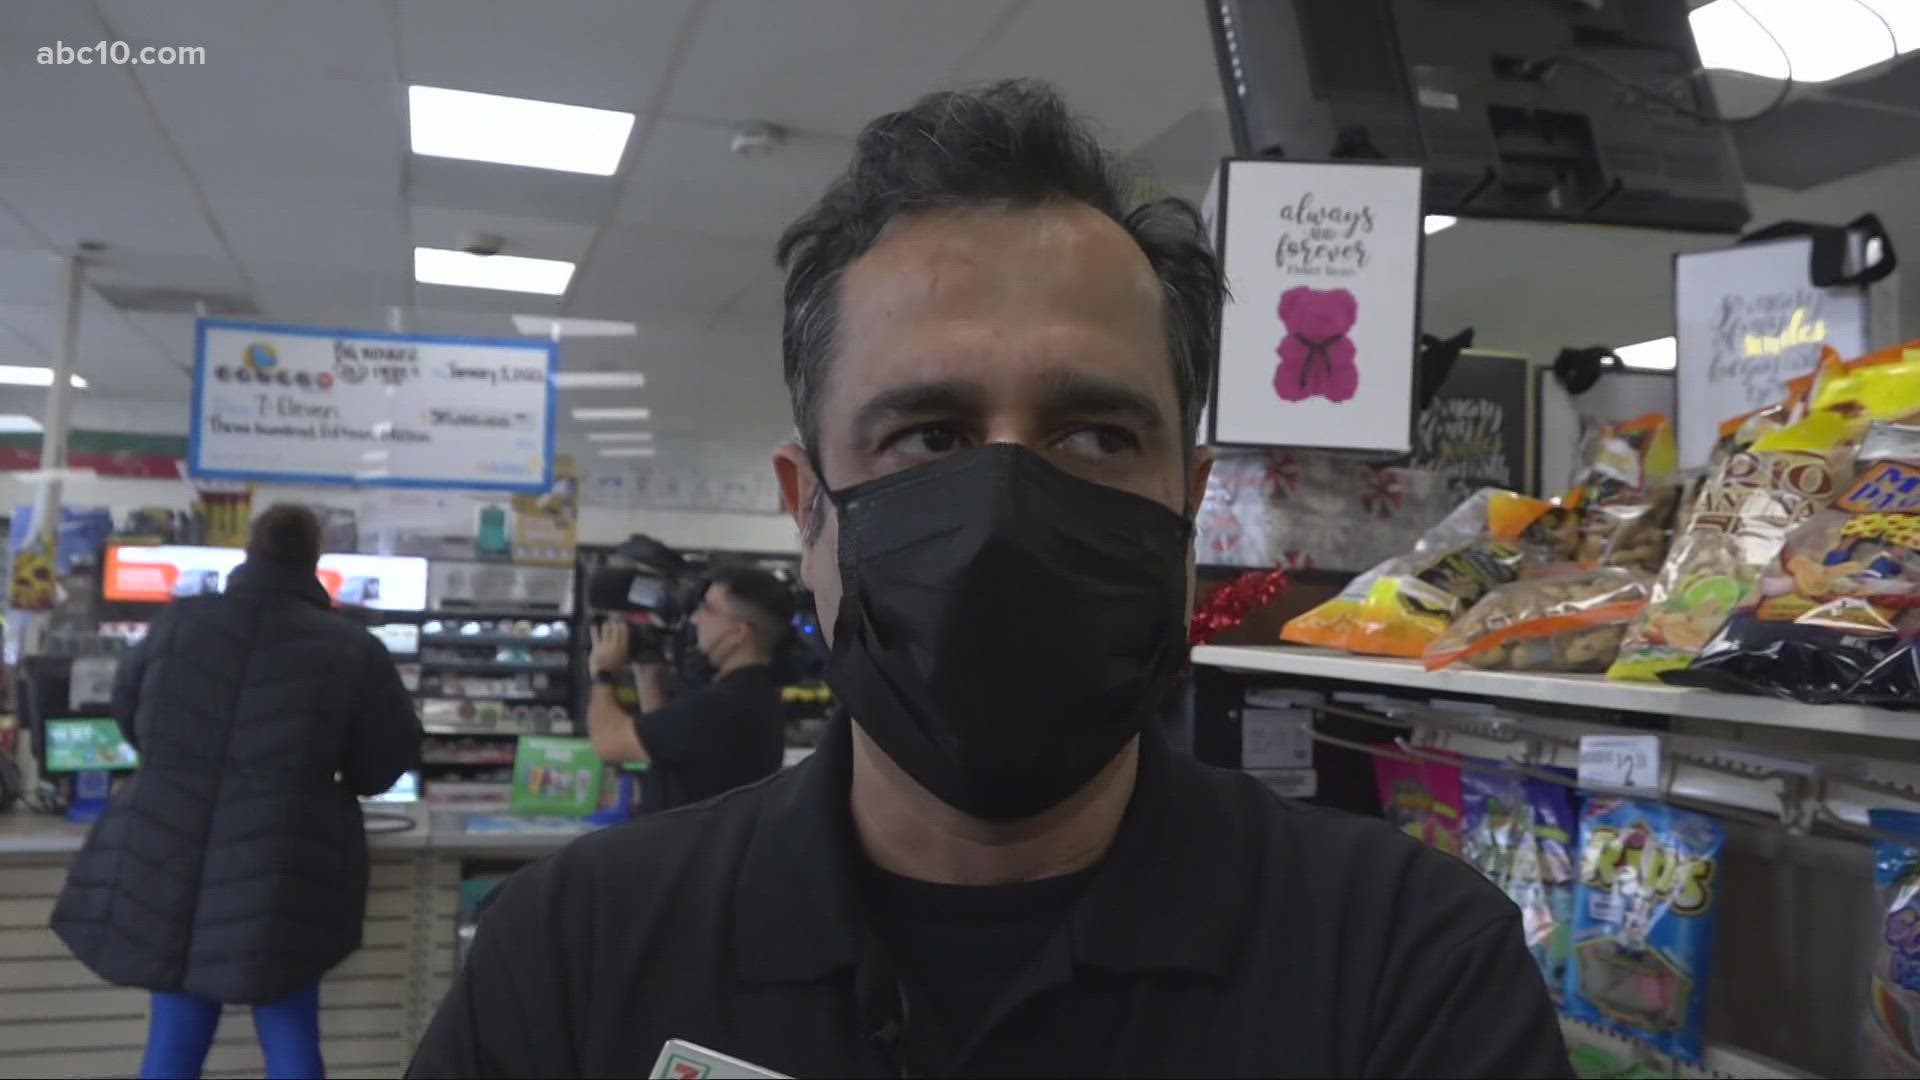 ABC10's Jay Kim was at a Sacramento 7-Eleven where he spoke with the franchisee who owns the location about what he will do with the money he receives.